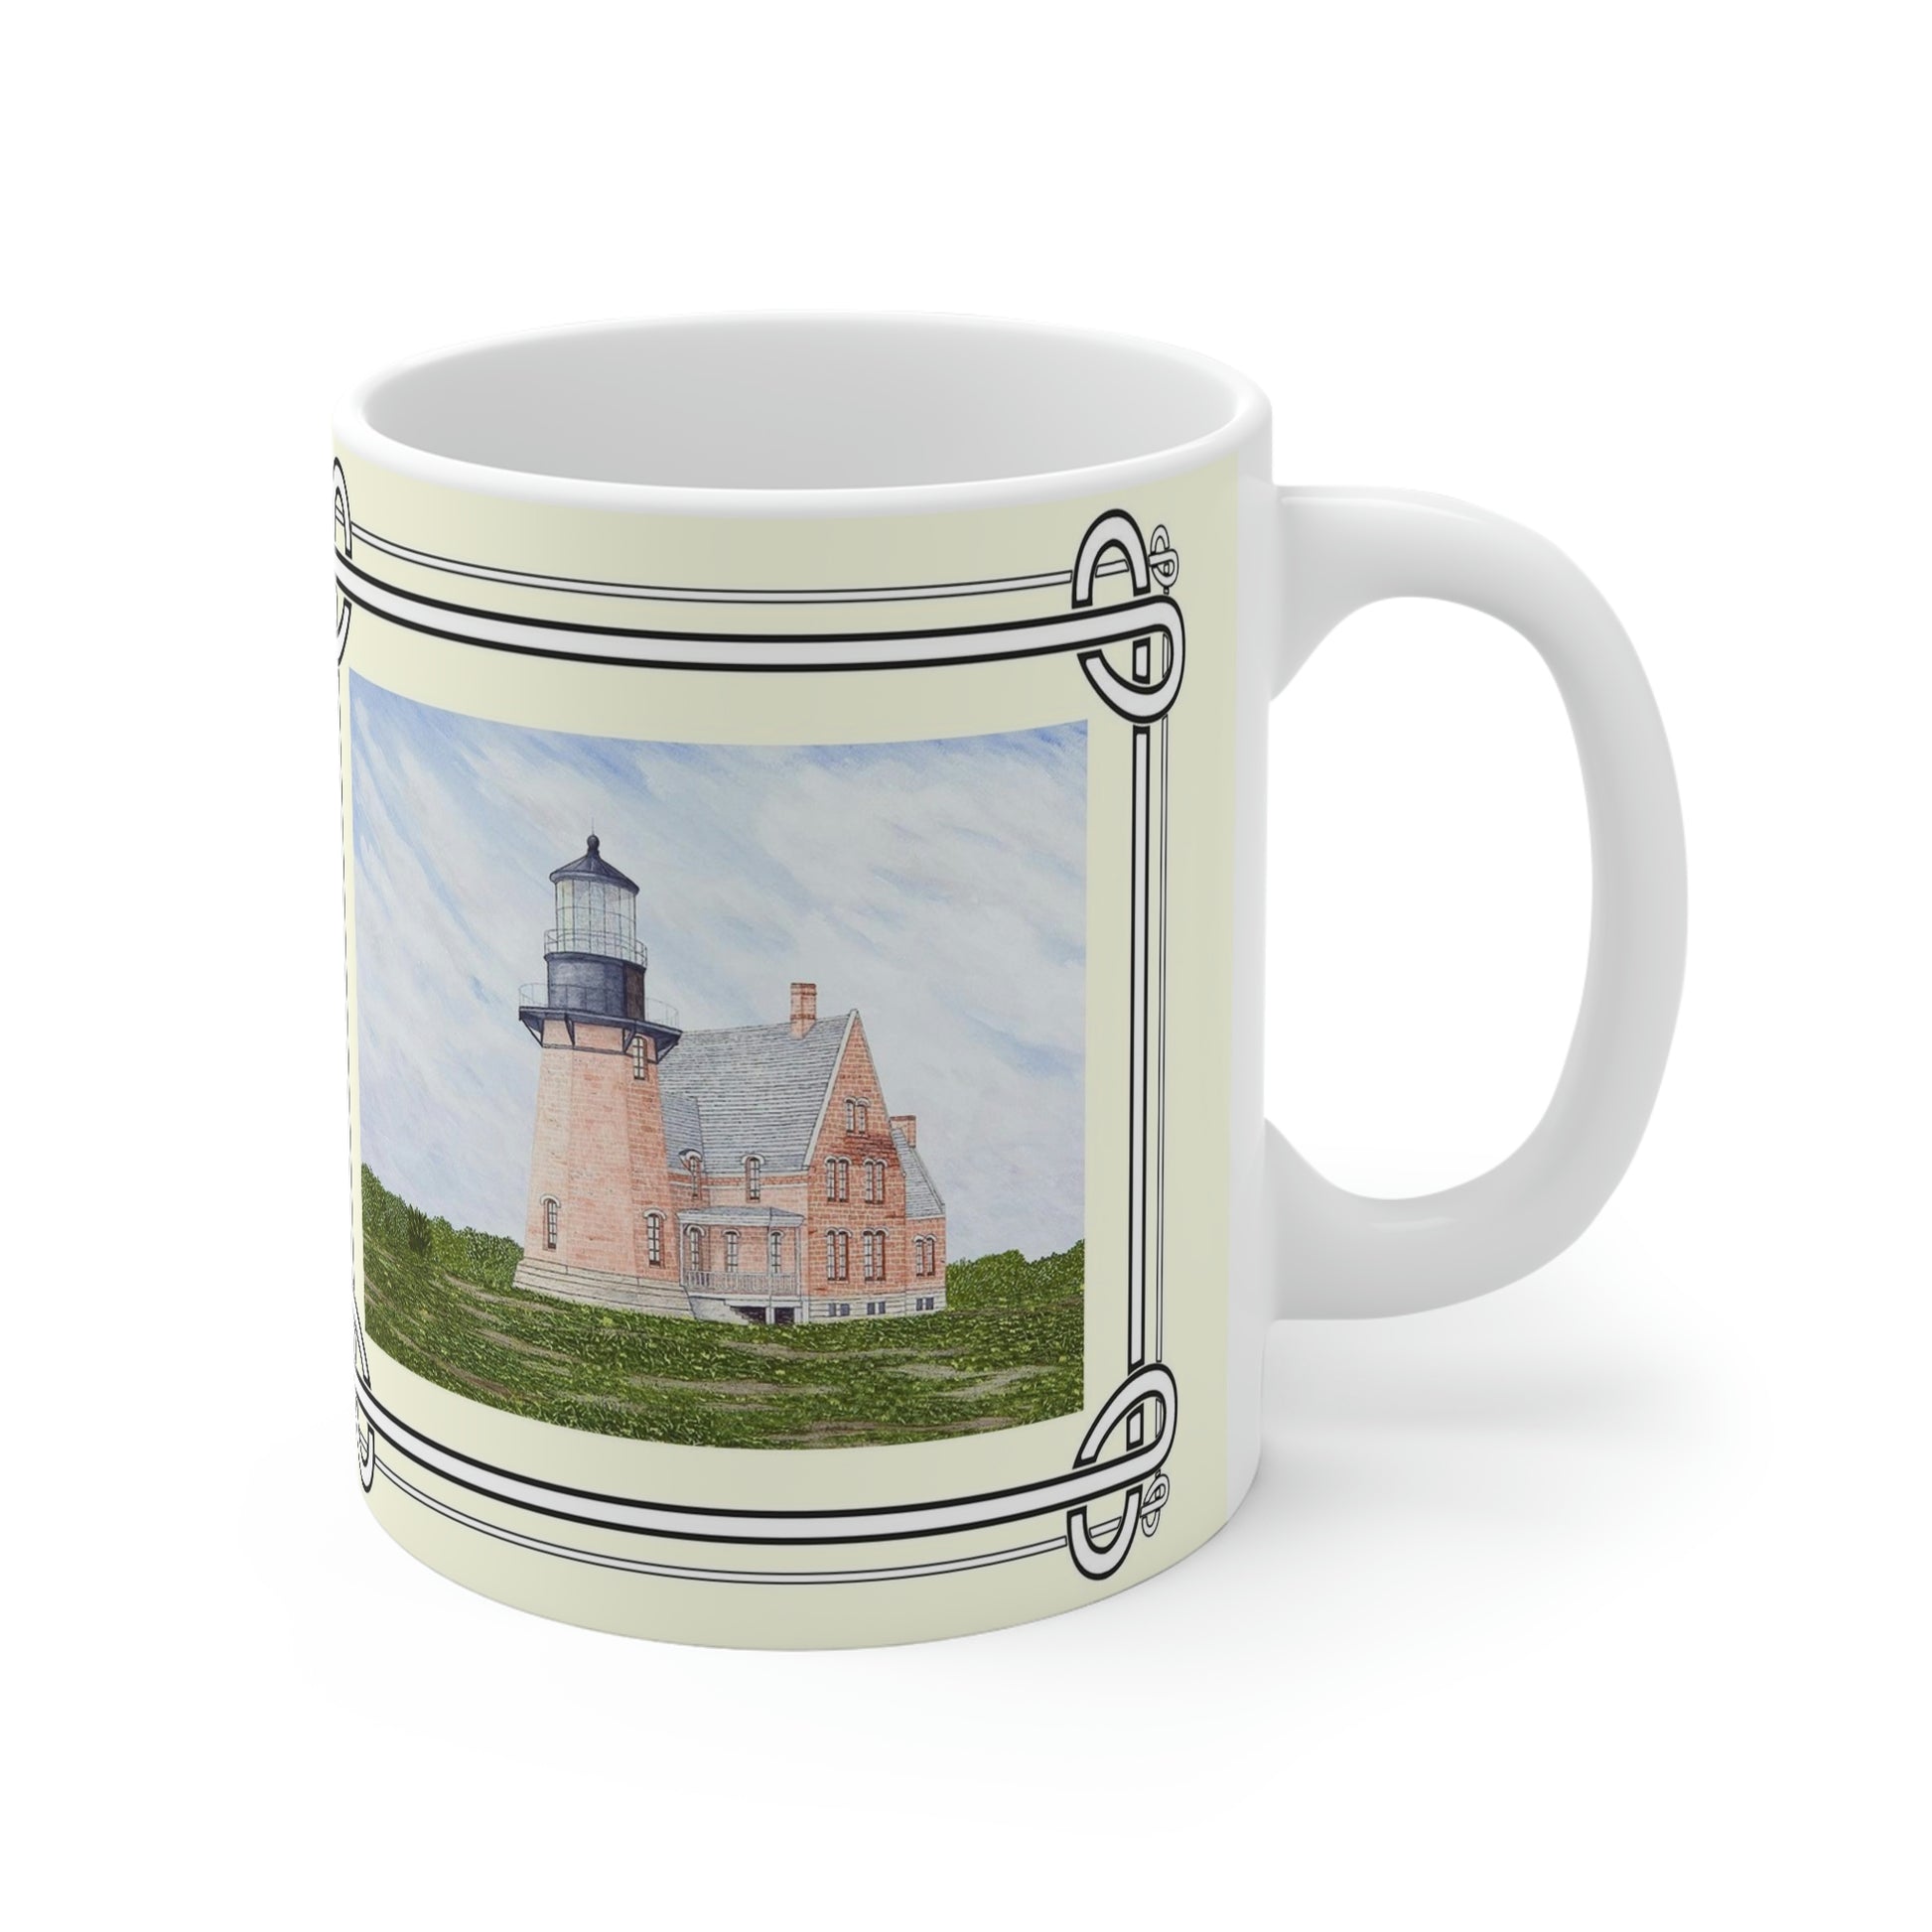 Southeast Light is located atop Mohegan Bluffs on Block Island, Rhode Island. The island is surrounded by submerged rocks and sandy shoals. Built in 1875, the octagonal tower is 67 feet tall. In 1993 the lighthouse was moved 300 feet inland to protect it from erosion.  The mug design is a reproduction of an original watercolor by Lee M. Buchanan and has the image on the front and back of the mug.